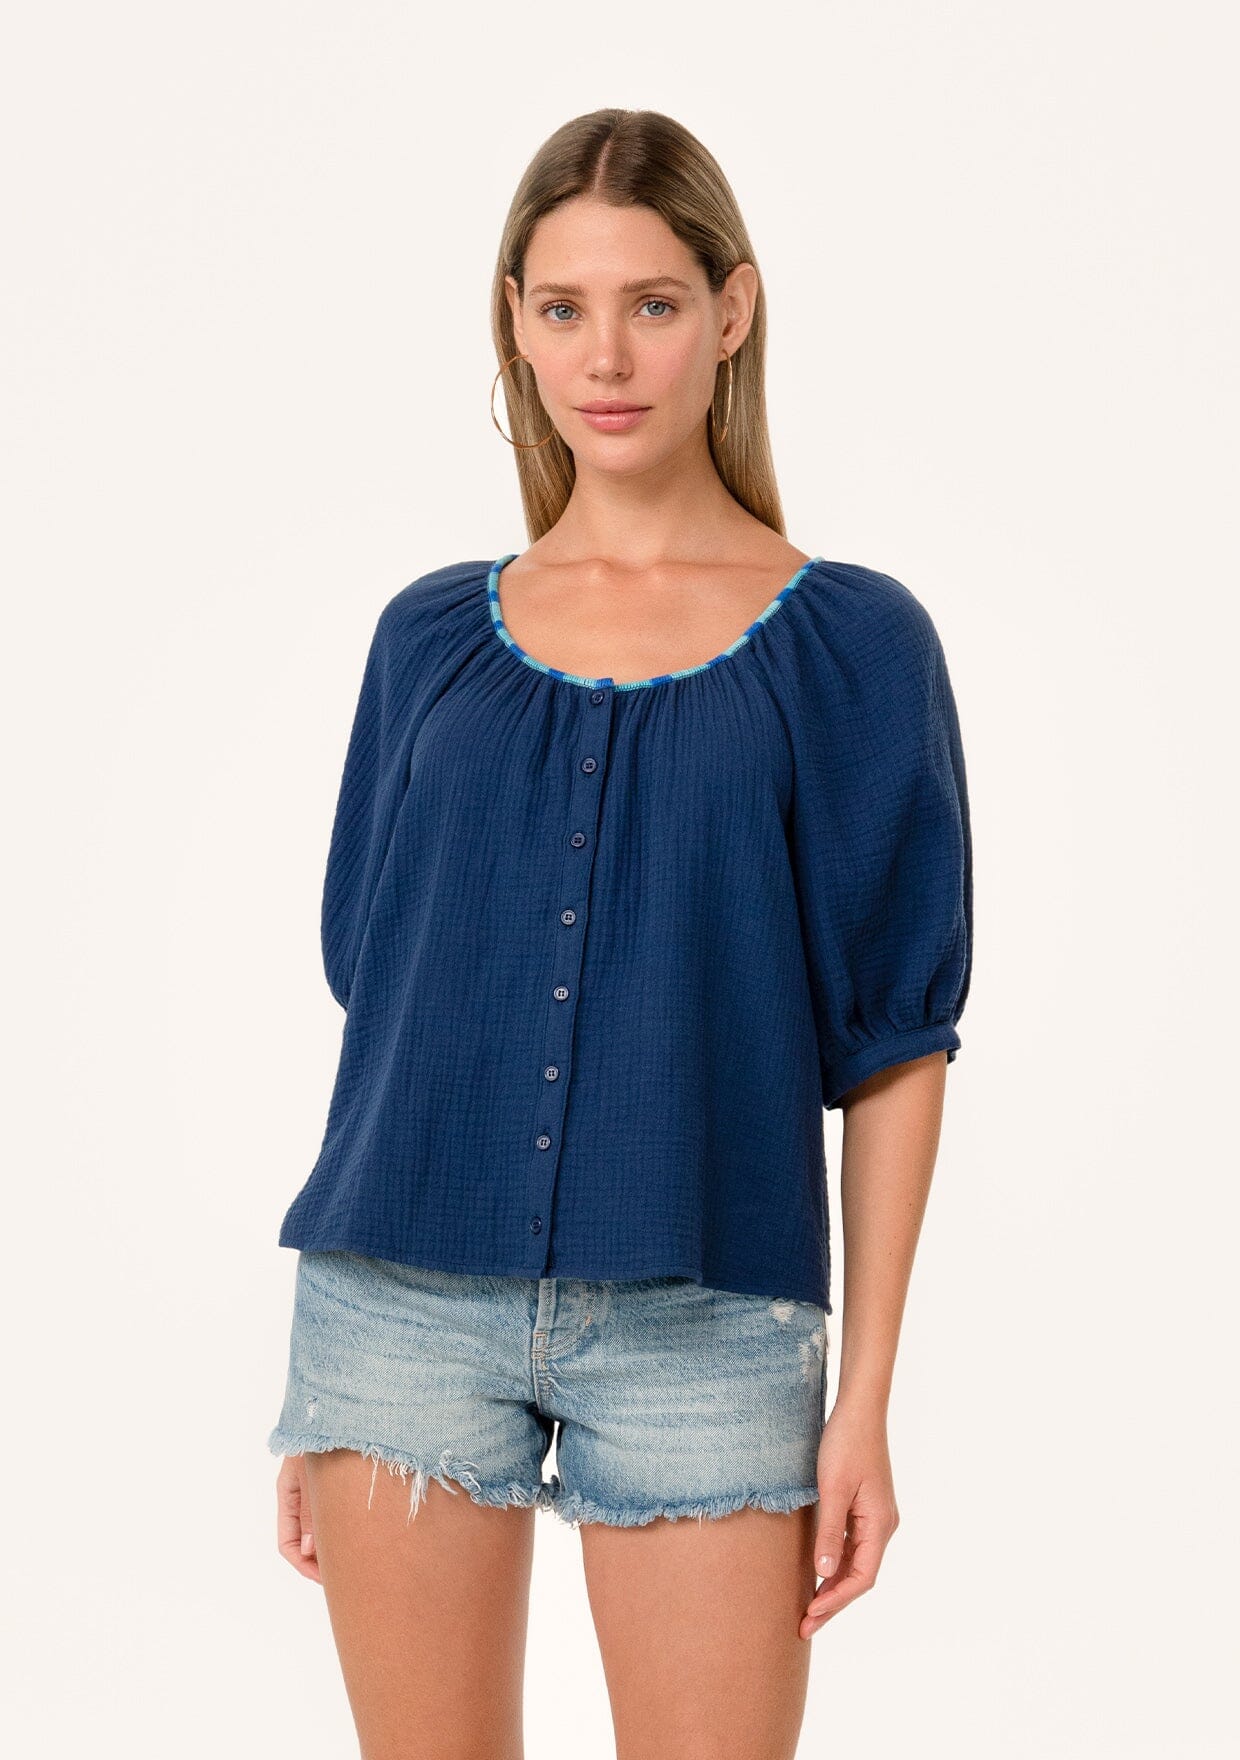 LOVESTITCH Tops – Unique & Affordable Boho Tops & Blouses – Page 2